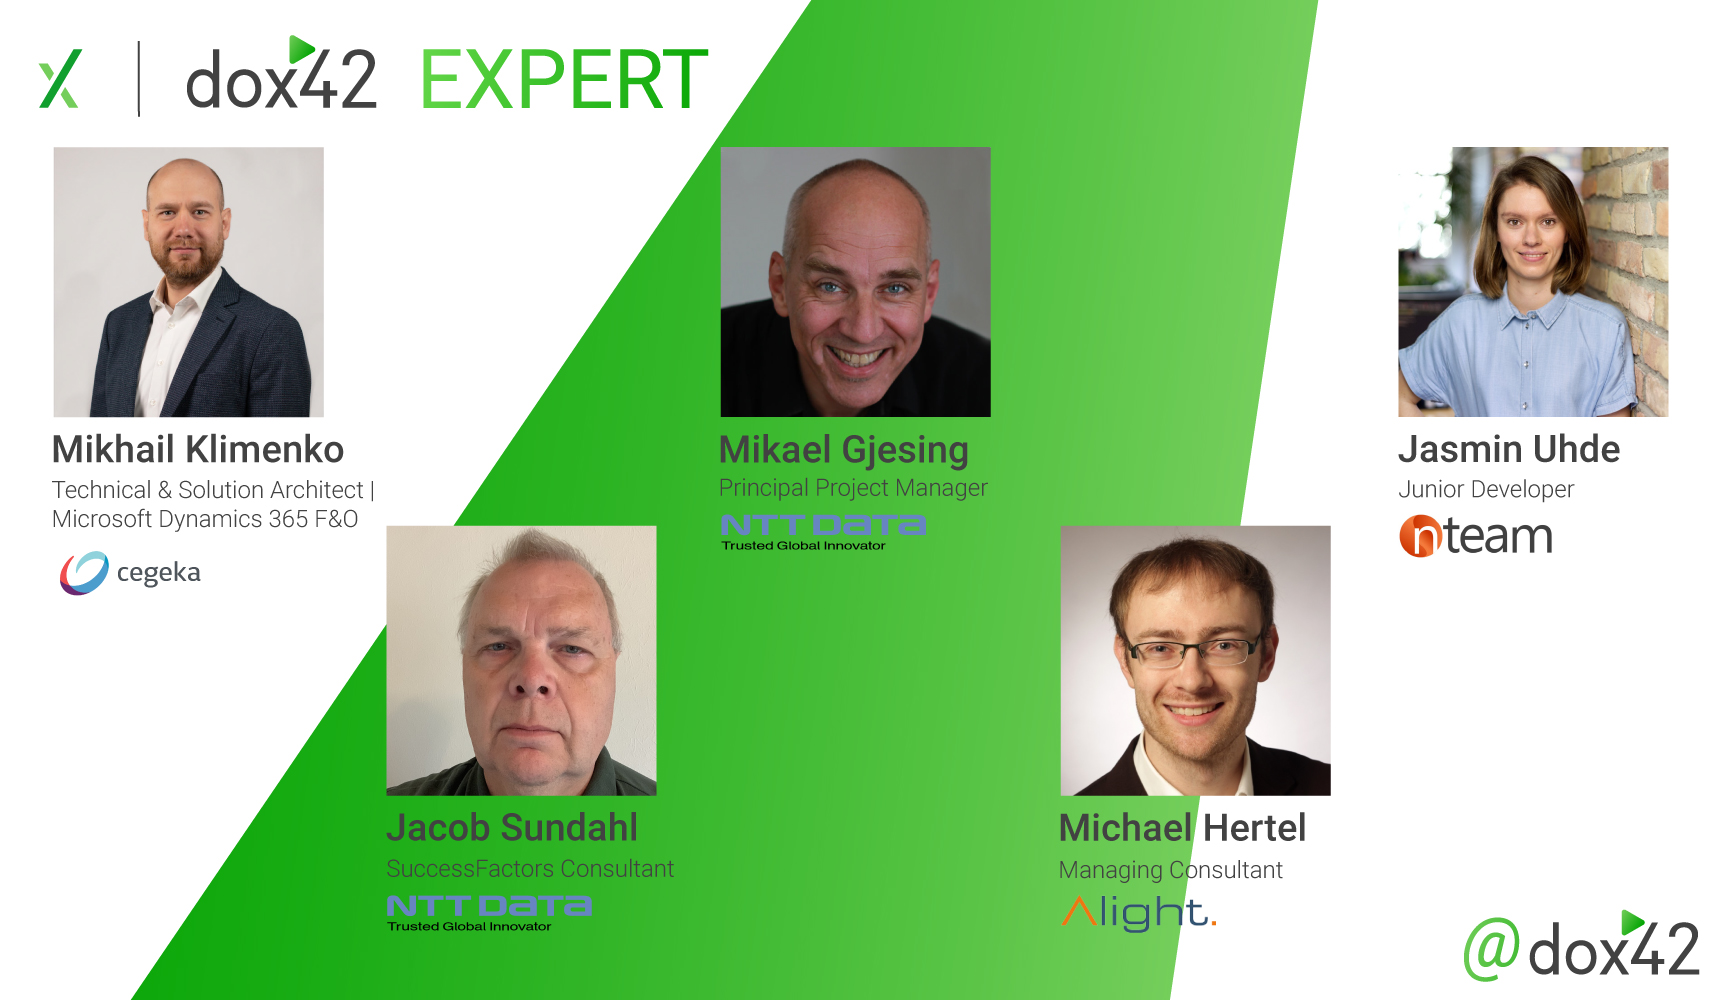 Meet our new dox42 Experts